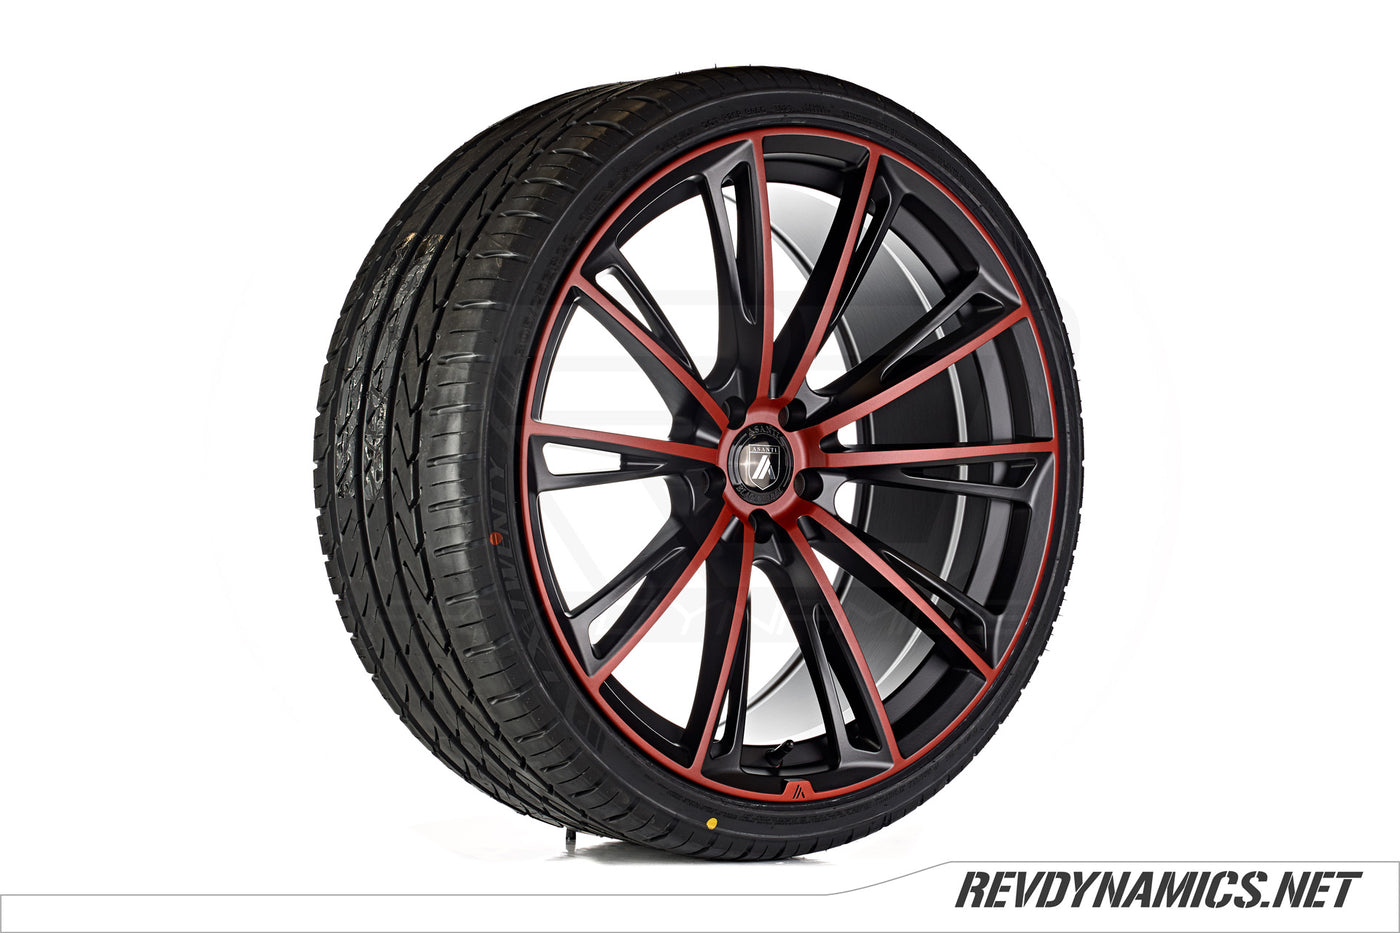 Asanti ABL-30 20" Wheel Powdercoated in Sunset Red and Black